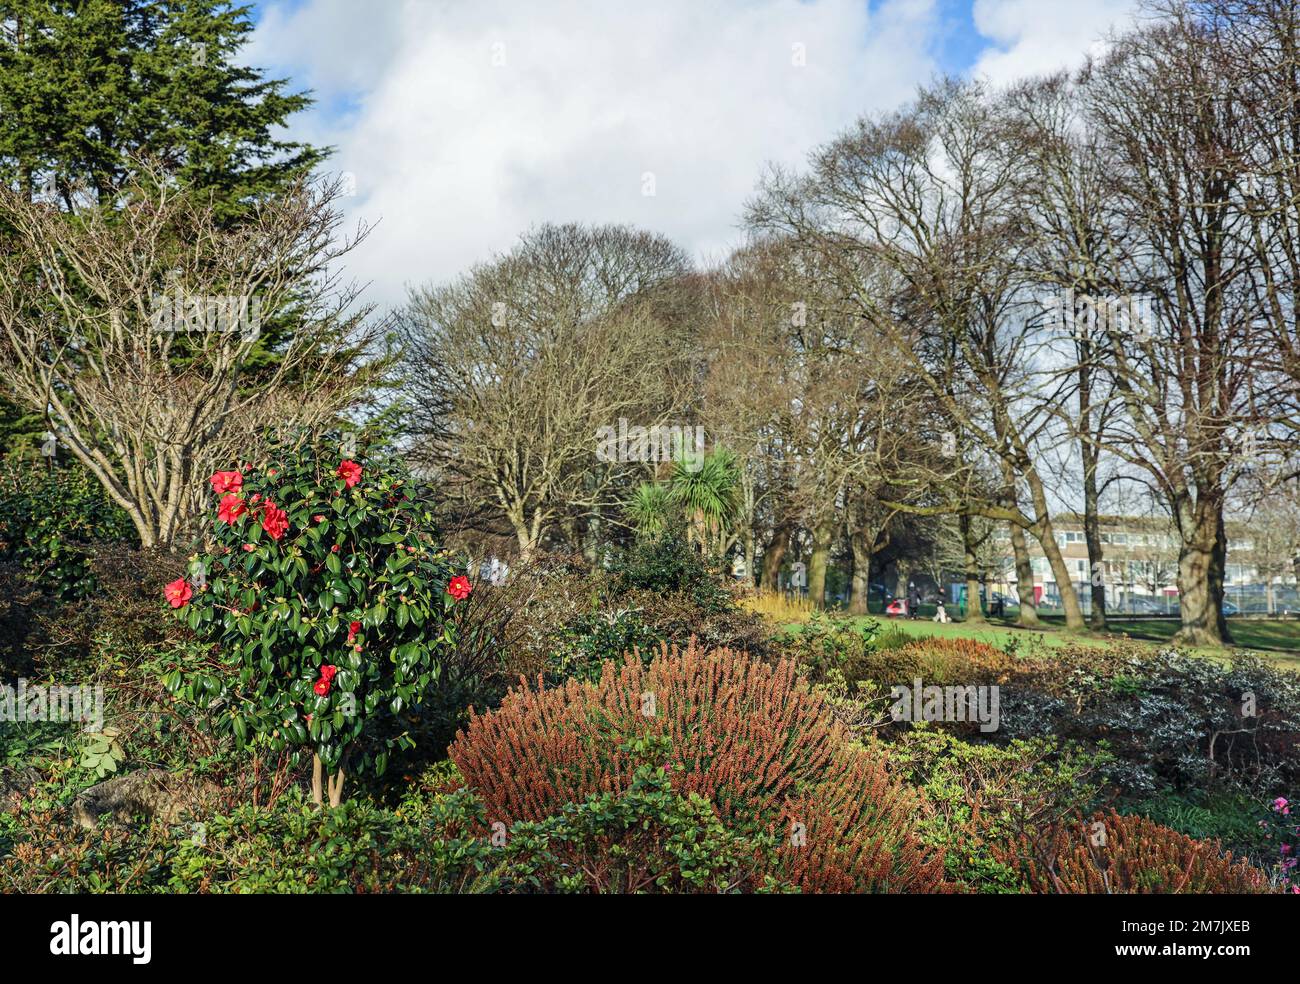 Devonport Park in Plymouth is often refered to as the Peoples Park. A bright red camellia bush adds a touch of clour on a bright January afternoon. Stock Photo